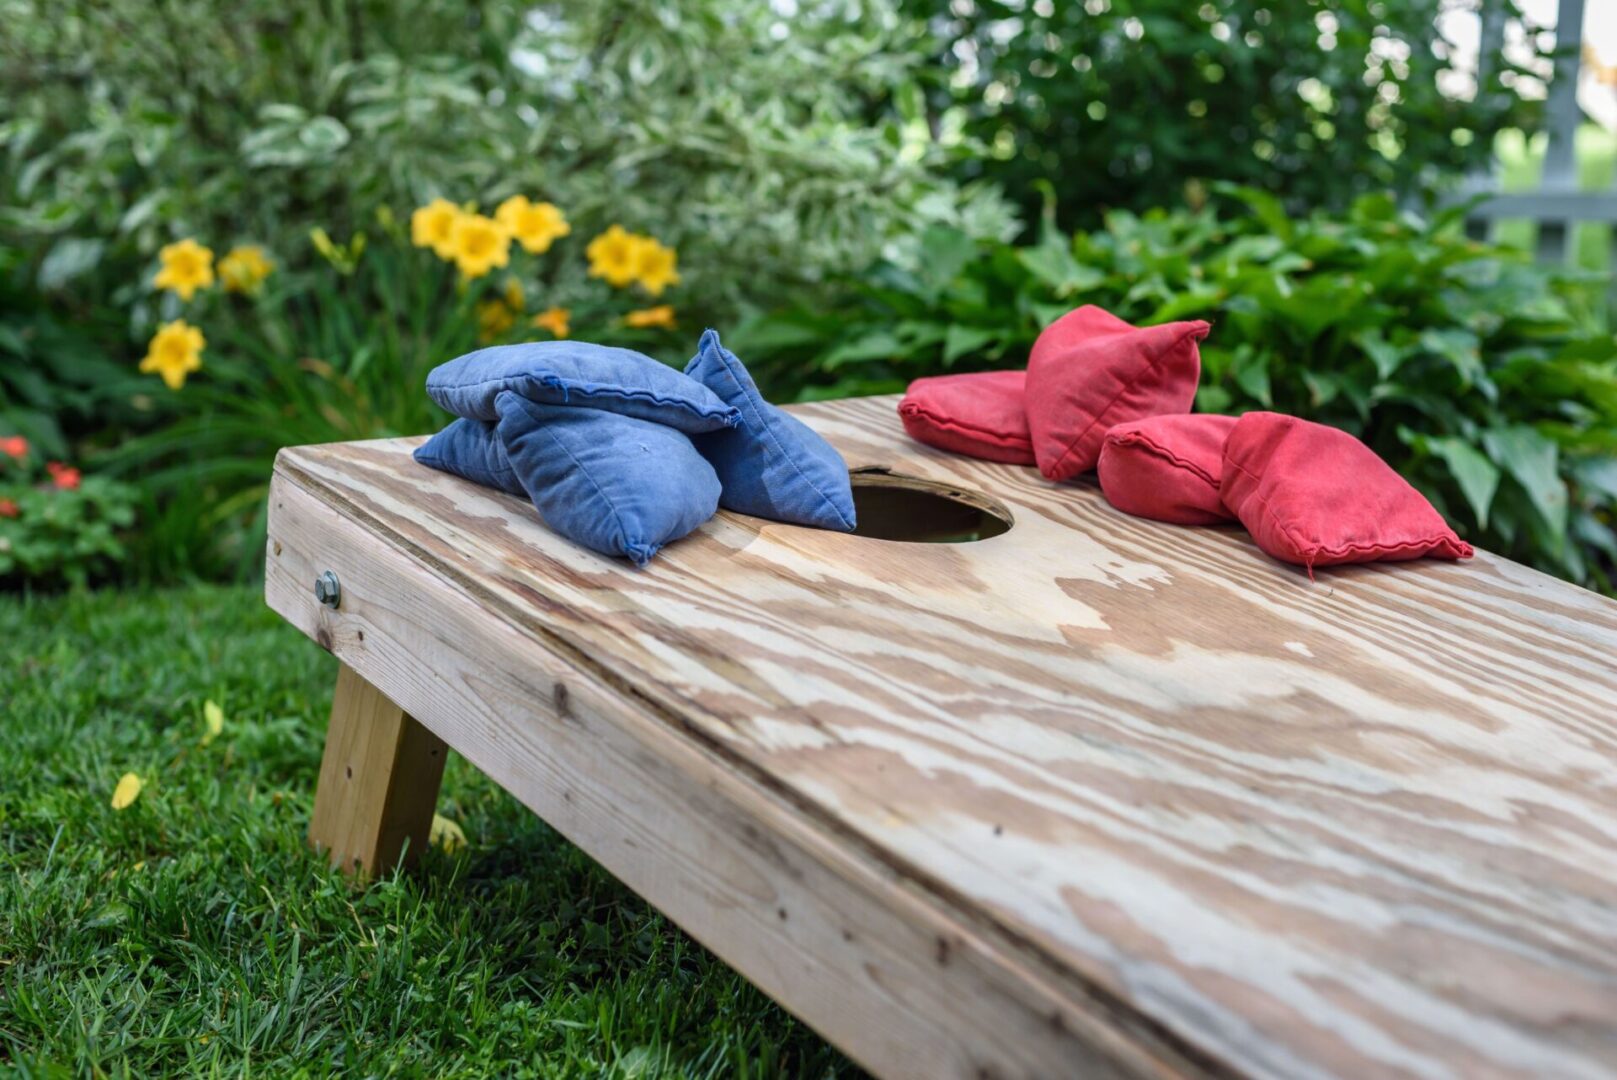 A wooden table with red and blue pillows on it.